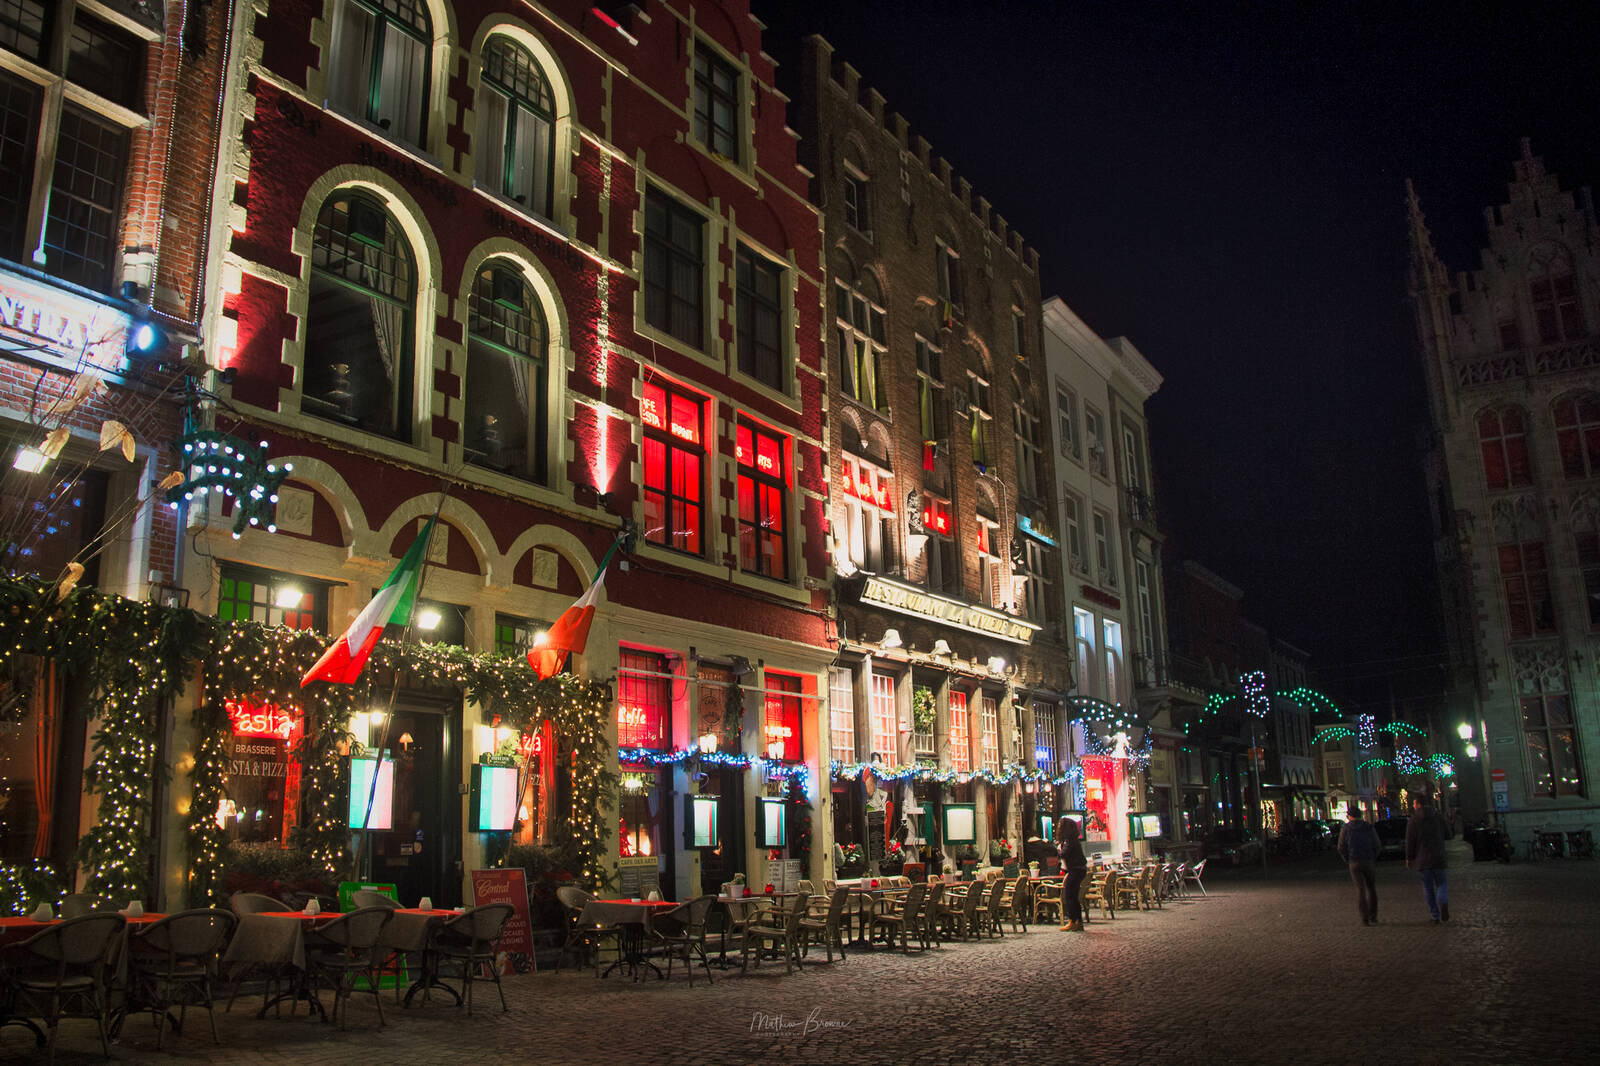 Image of Bruges Christmas Markets by Mathew Browne